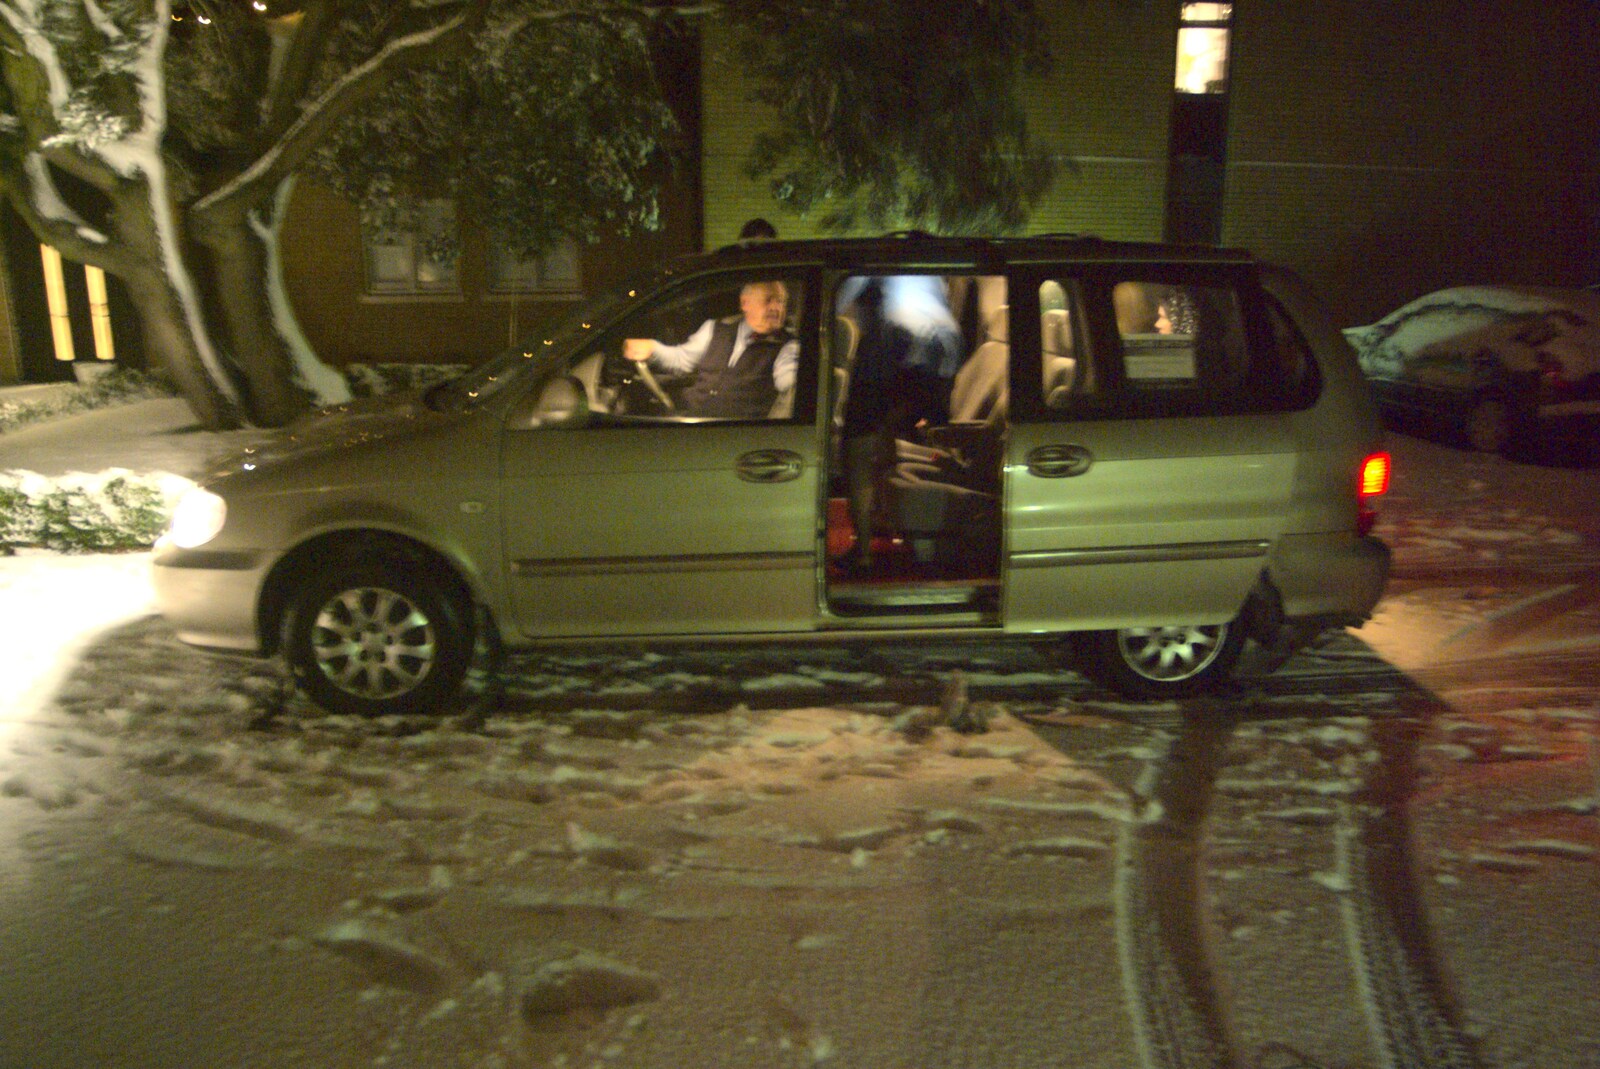 The taxi awaits from A Qualcomm Christmas and Festive Snow, Hotel Felix, Cambridge - 17th December 2009